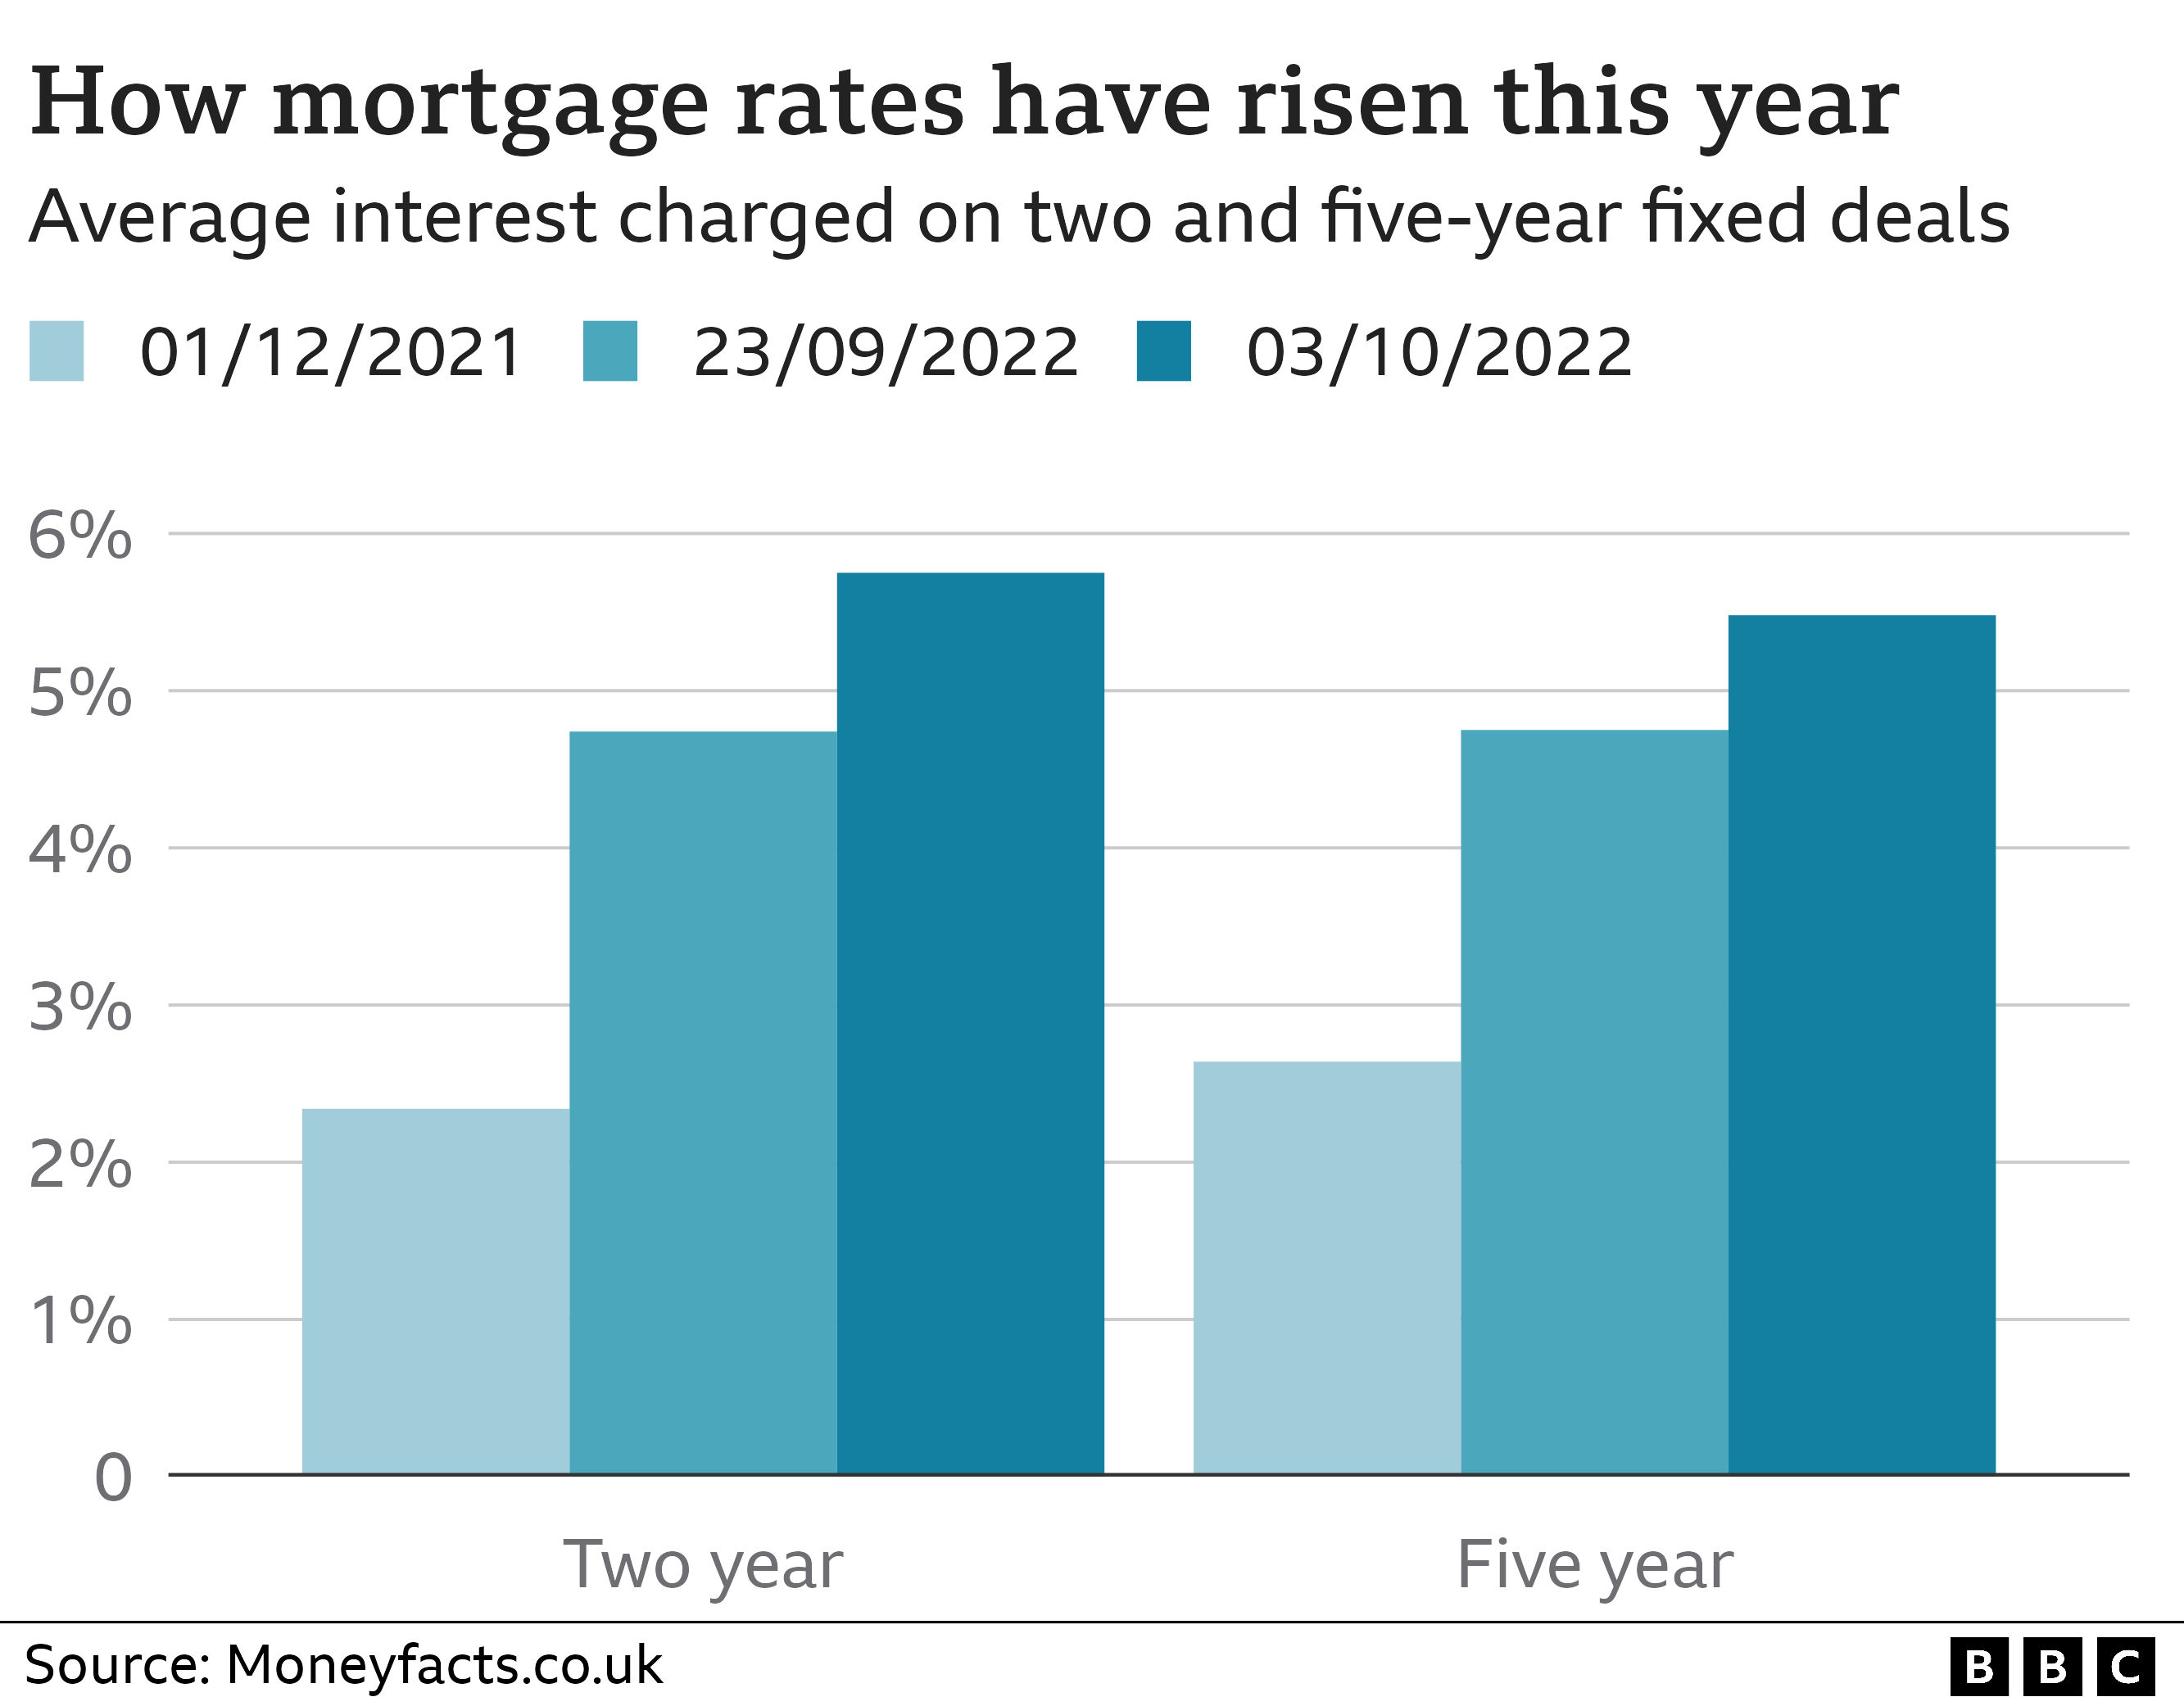 Chart showing how average interest rates on two and five-year fixed deals have risen this year